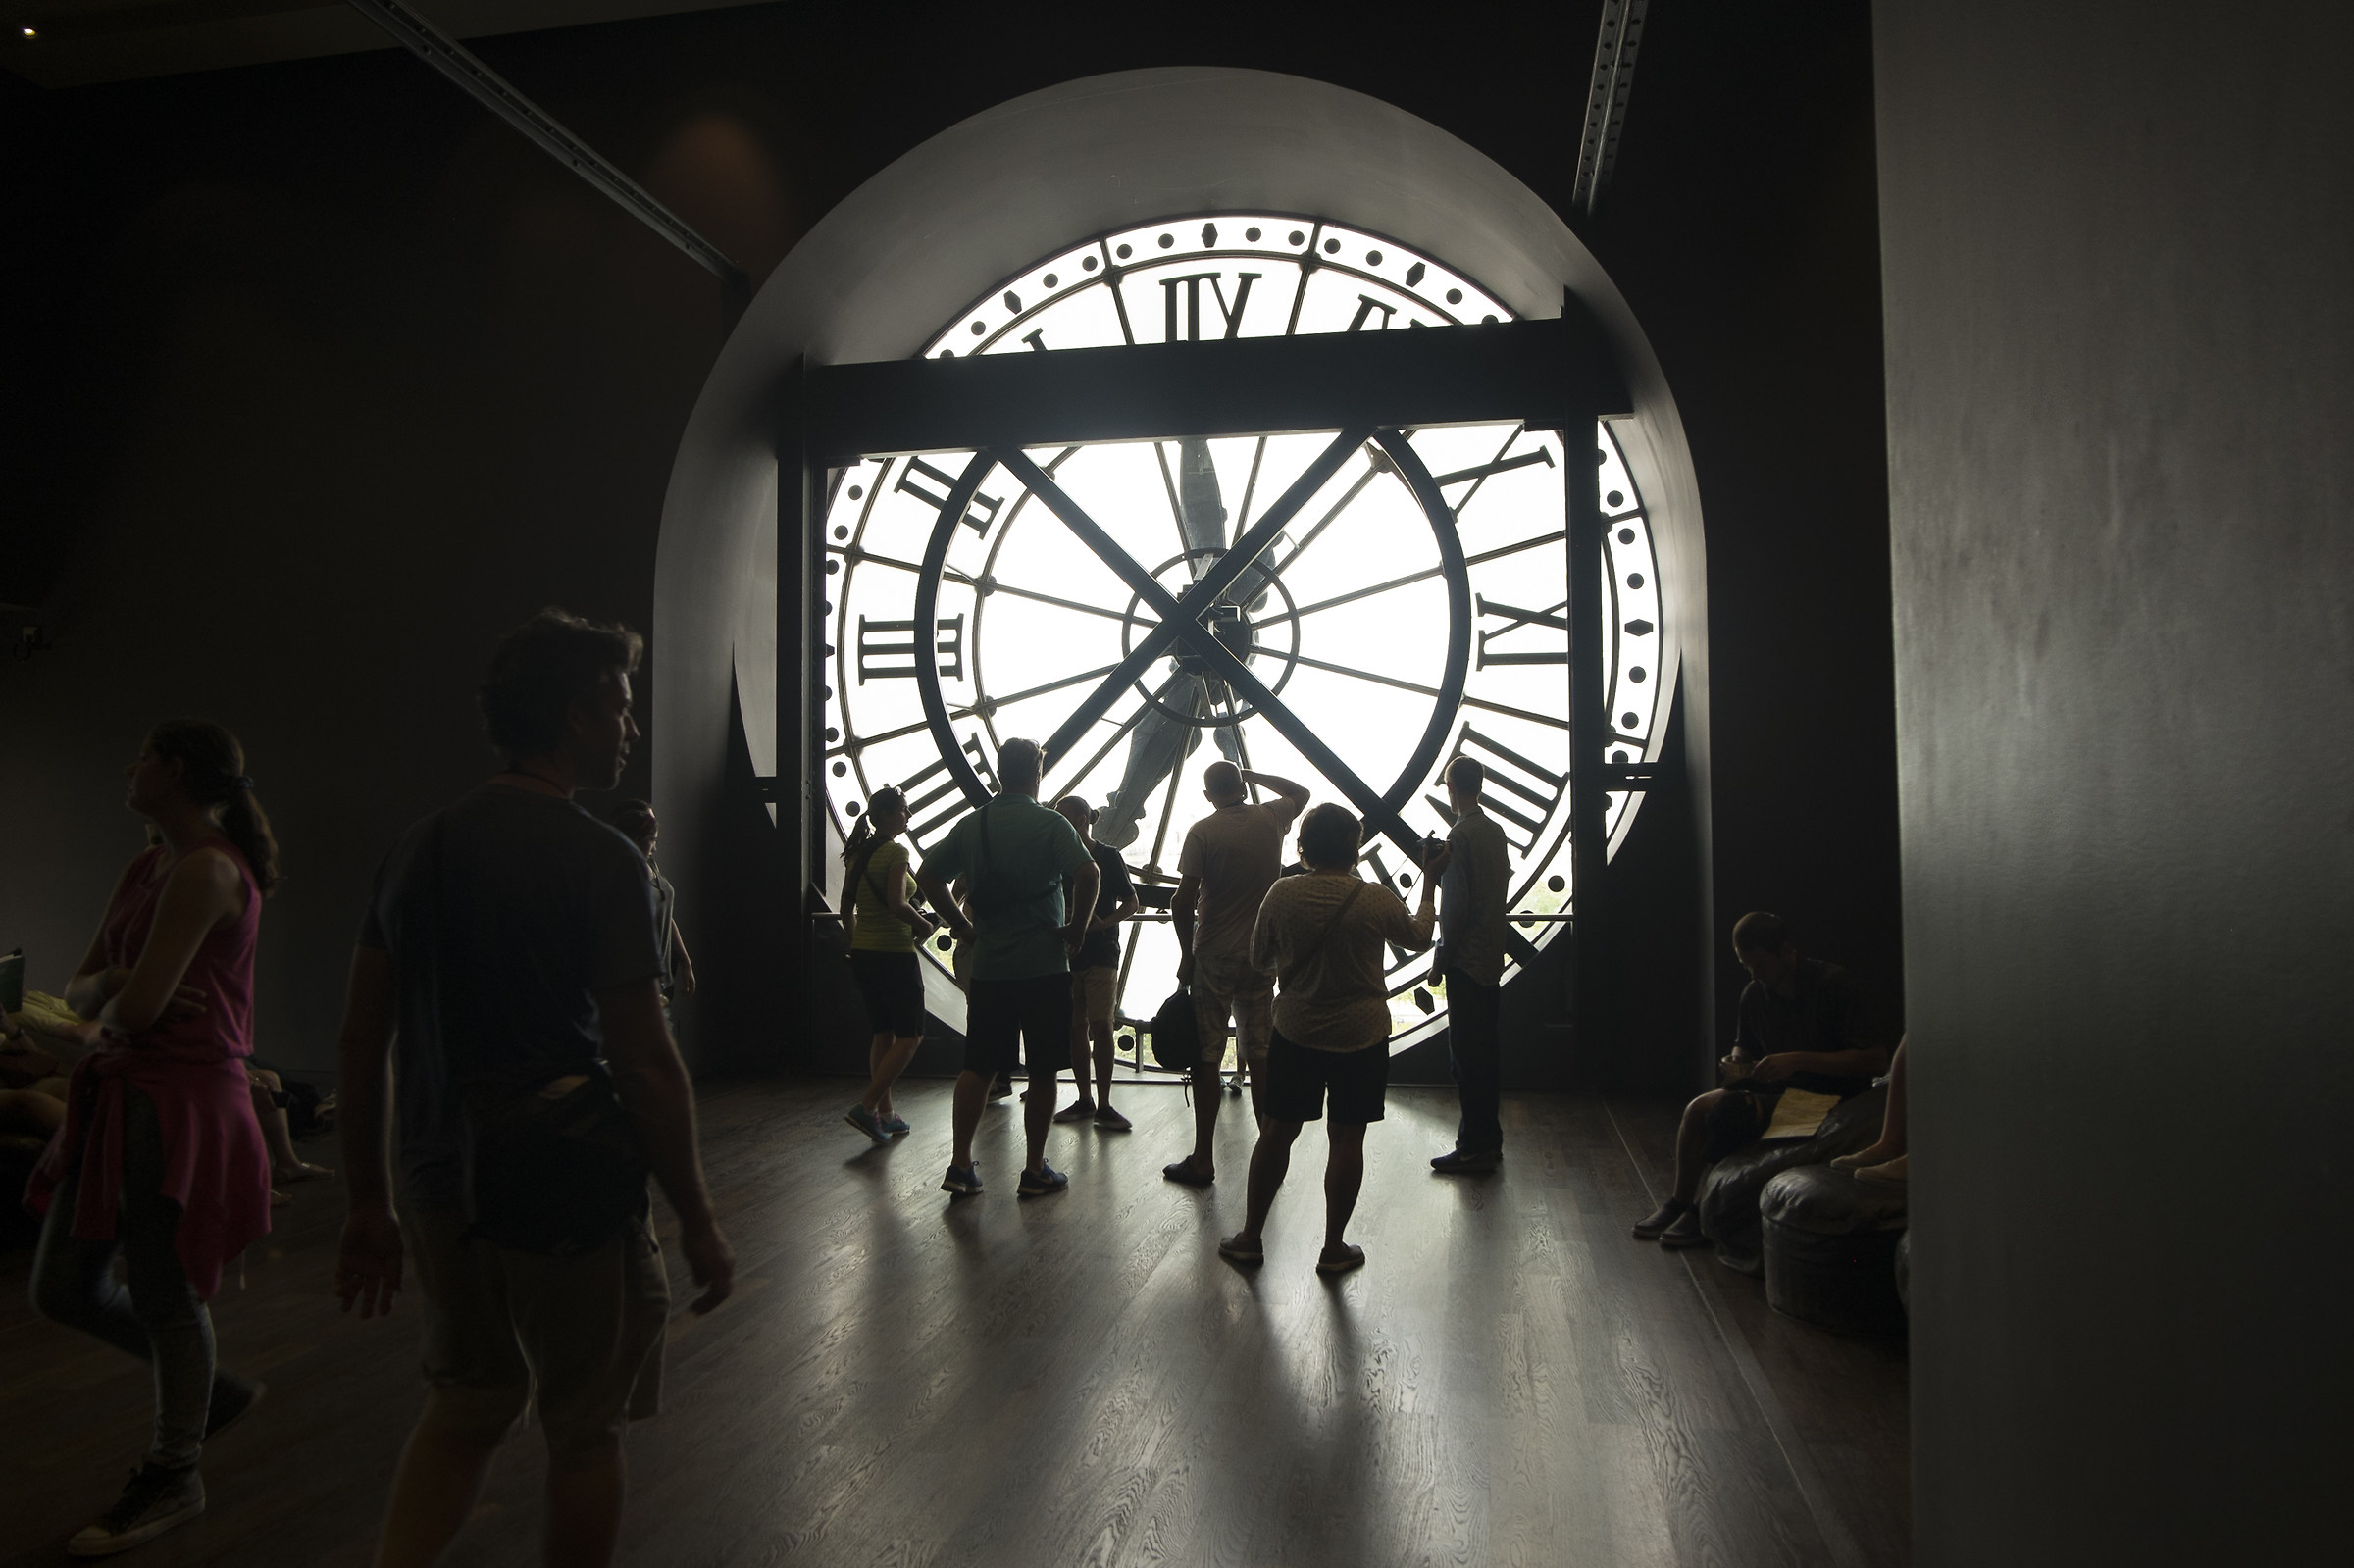 The clock at the Musee d'Orsay...